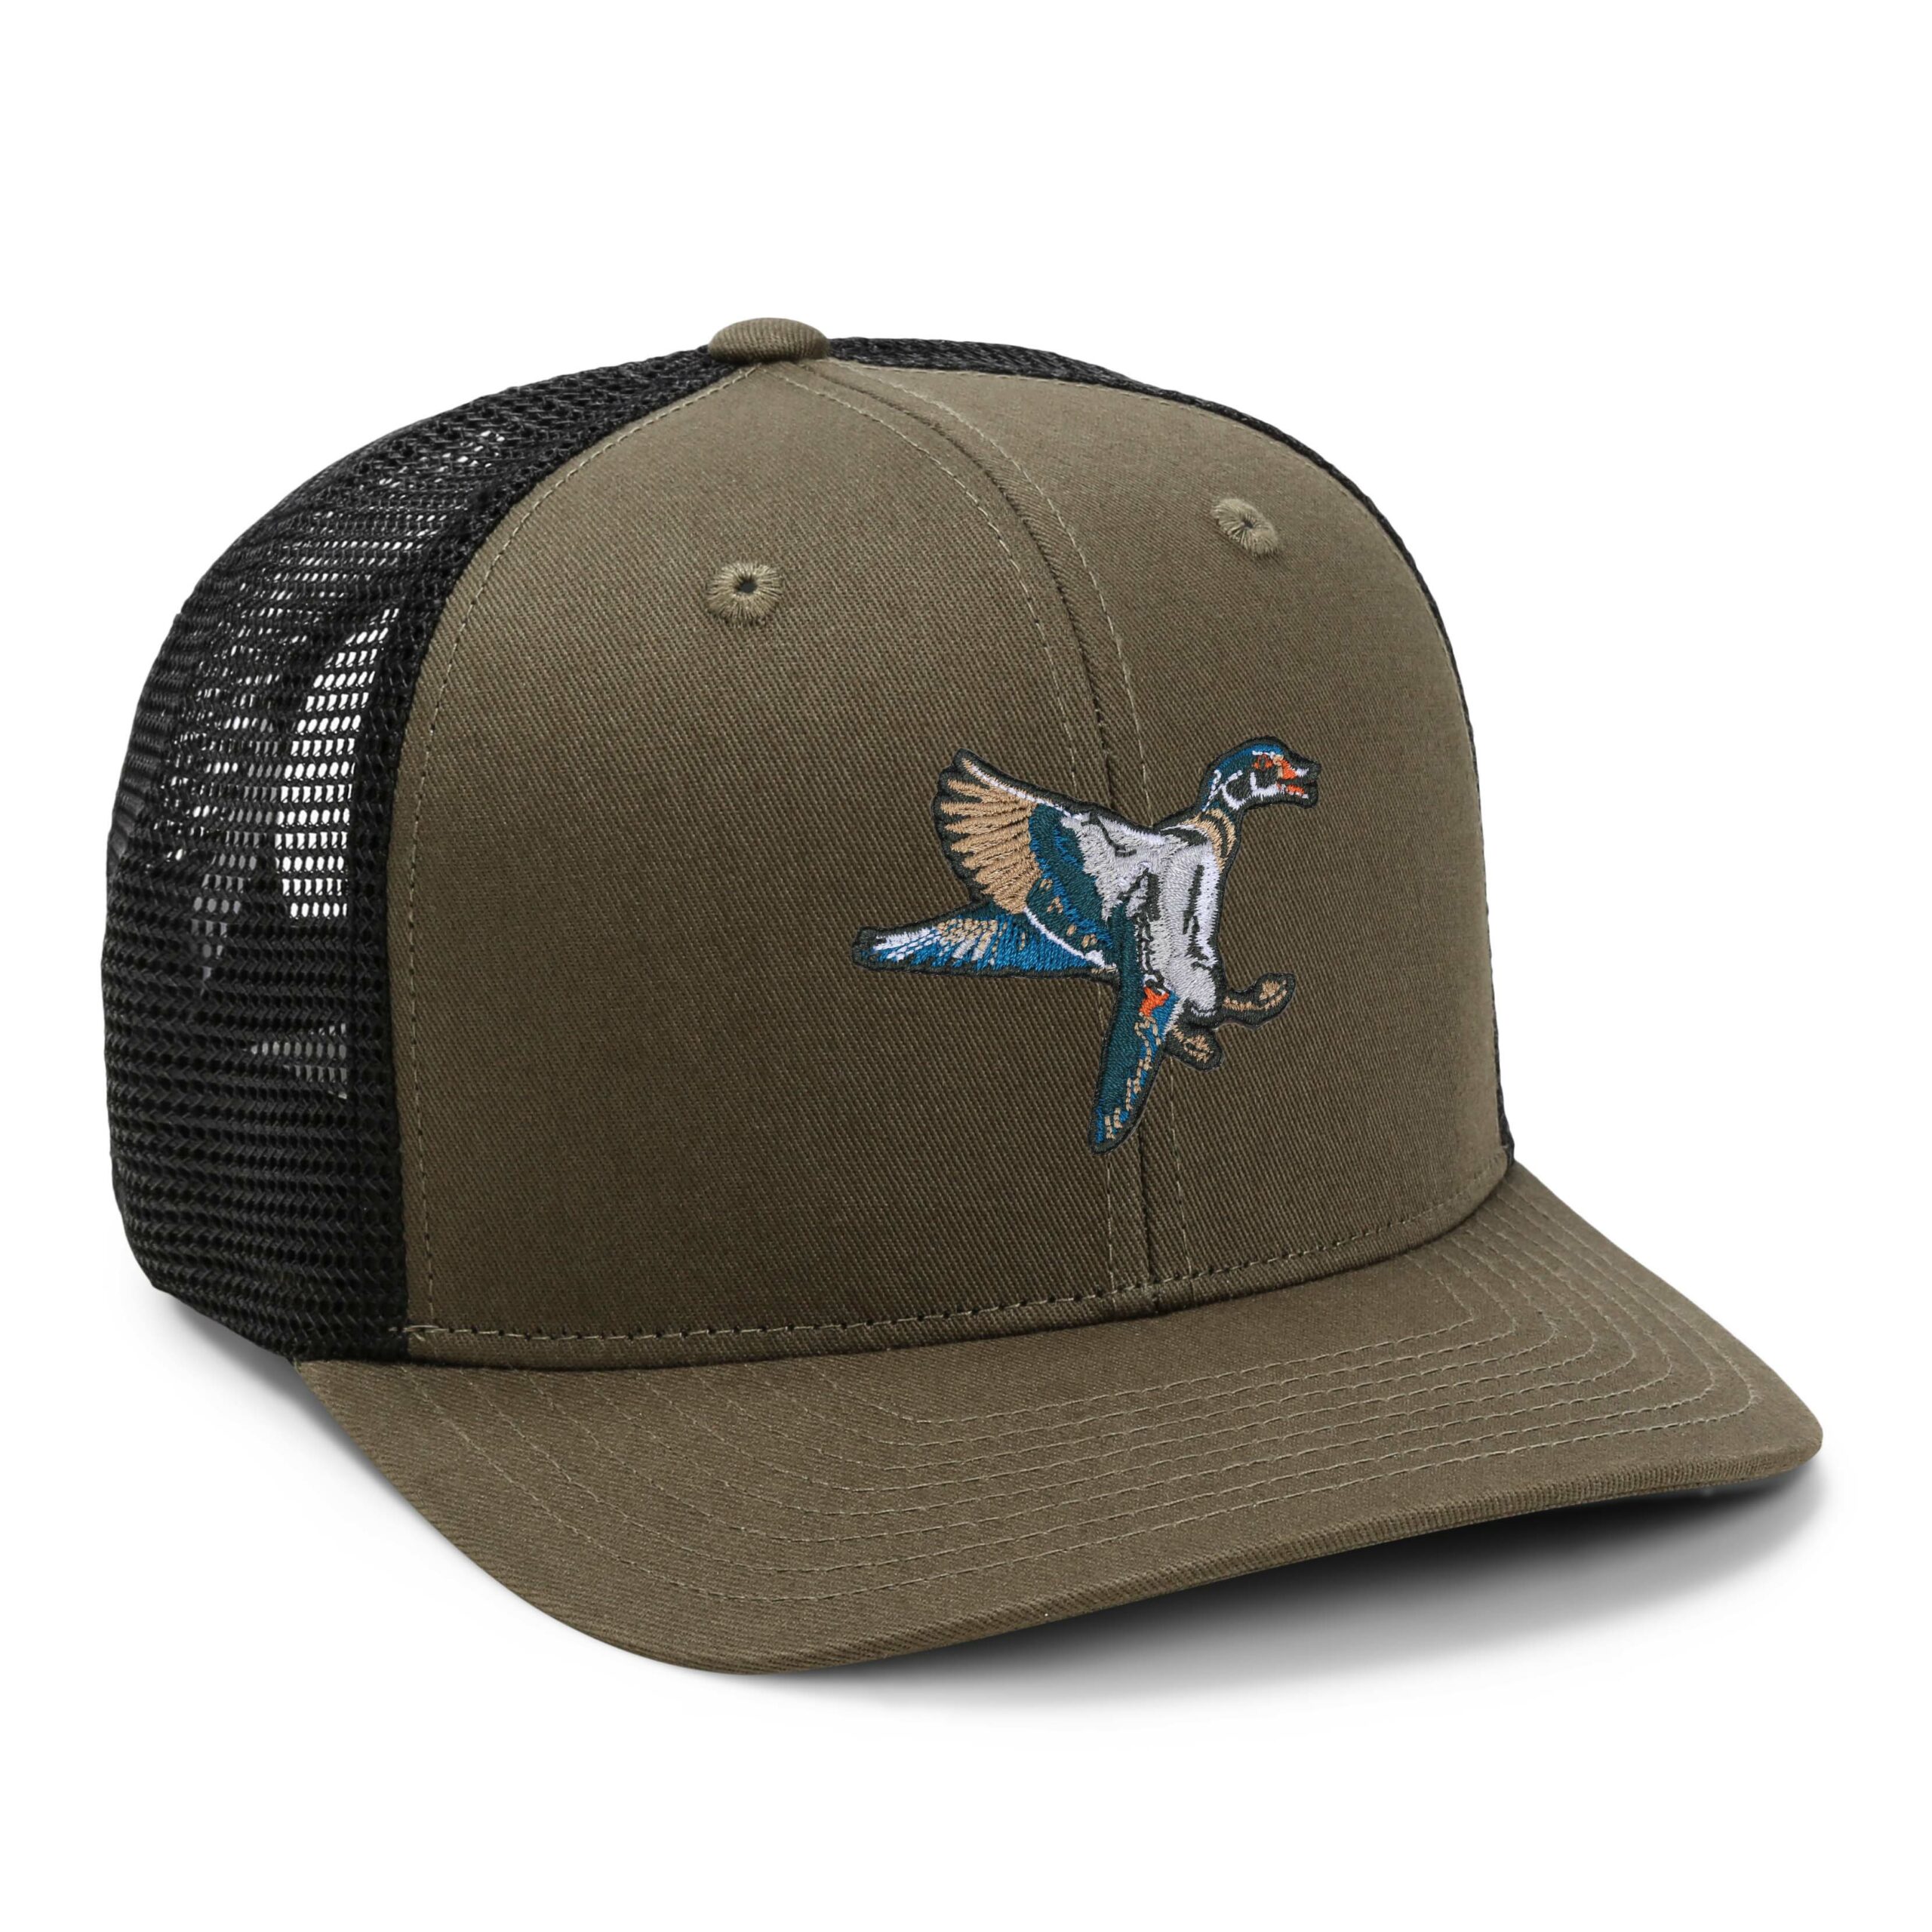 The Wood Duck - Mile High Meshback Cap